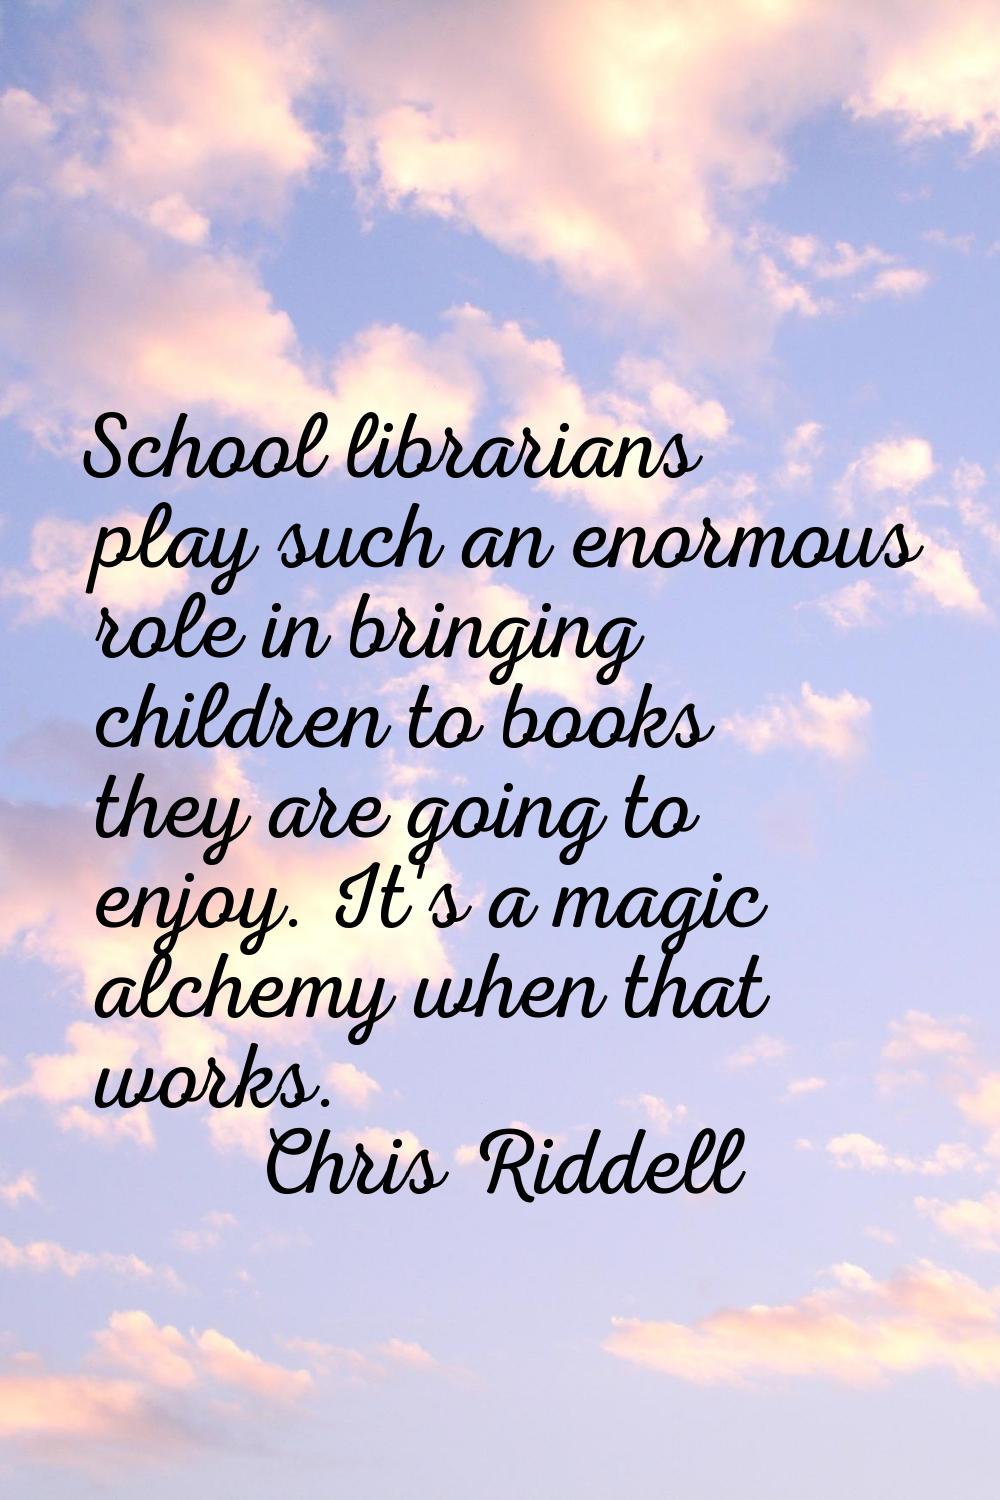 School librarians play such an enormous role in bringing children to books they are going to enjoy.